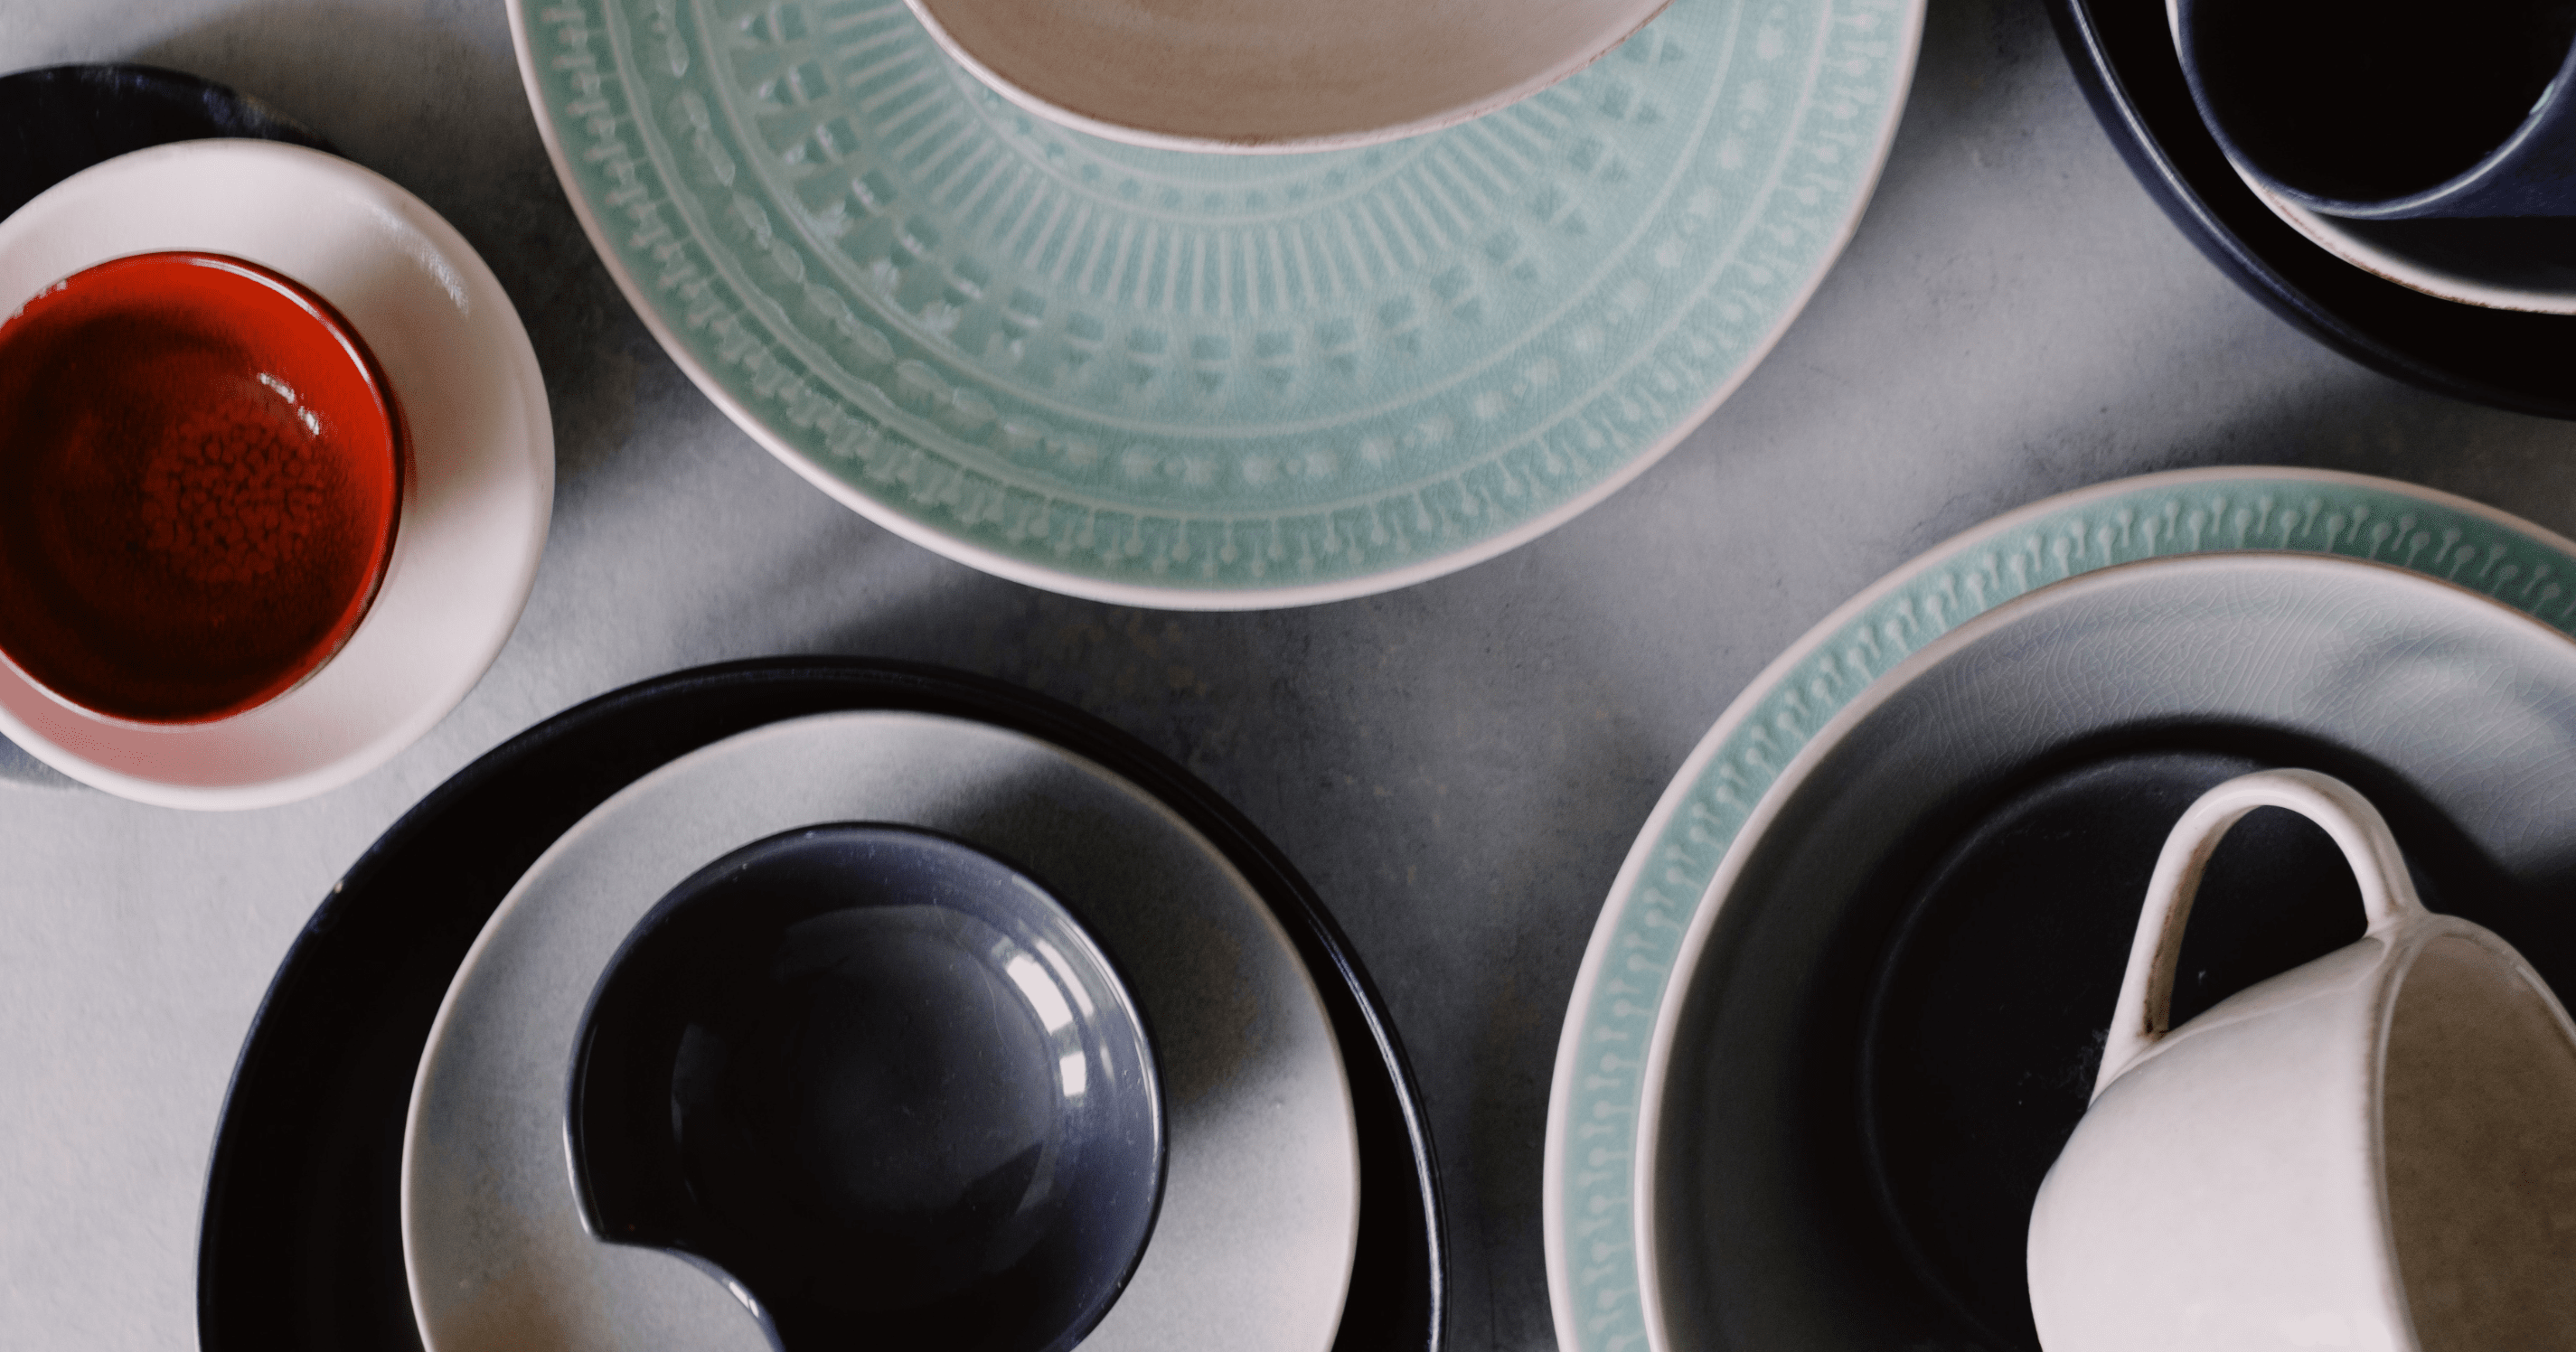 A stock image of kitchen crockery - start your property search on Share to Buy!